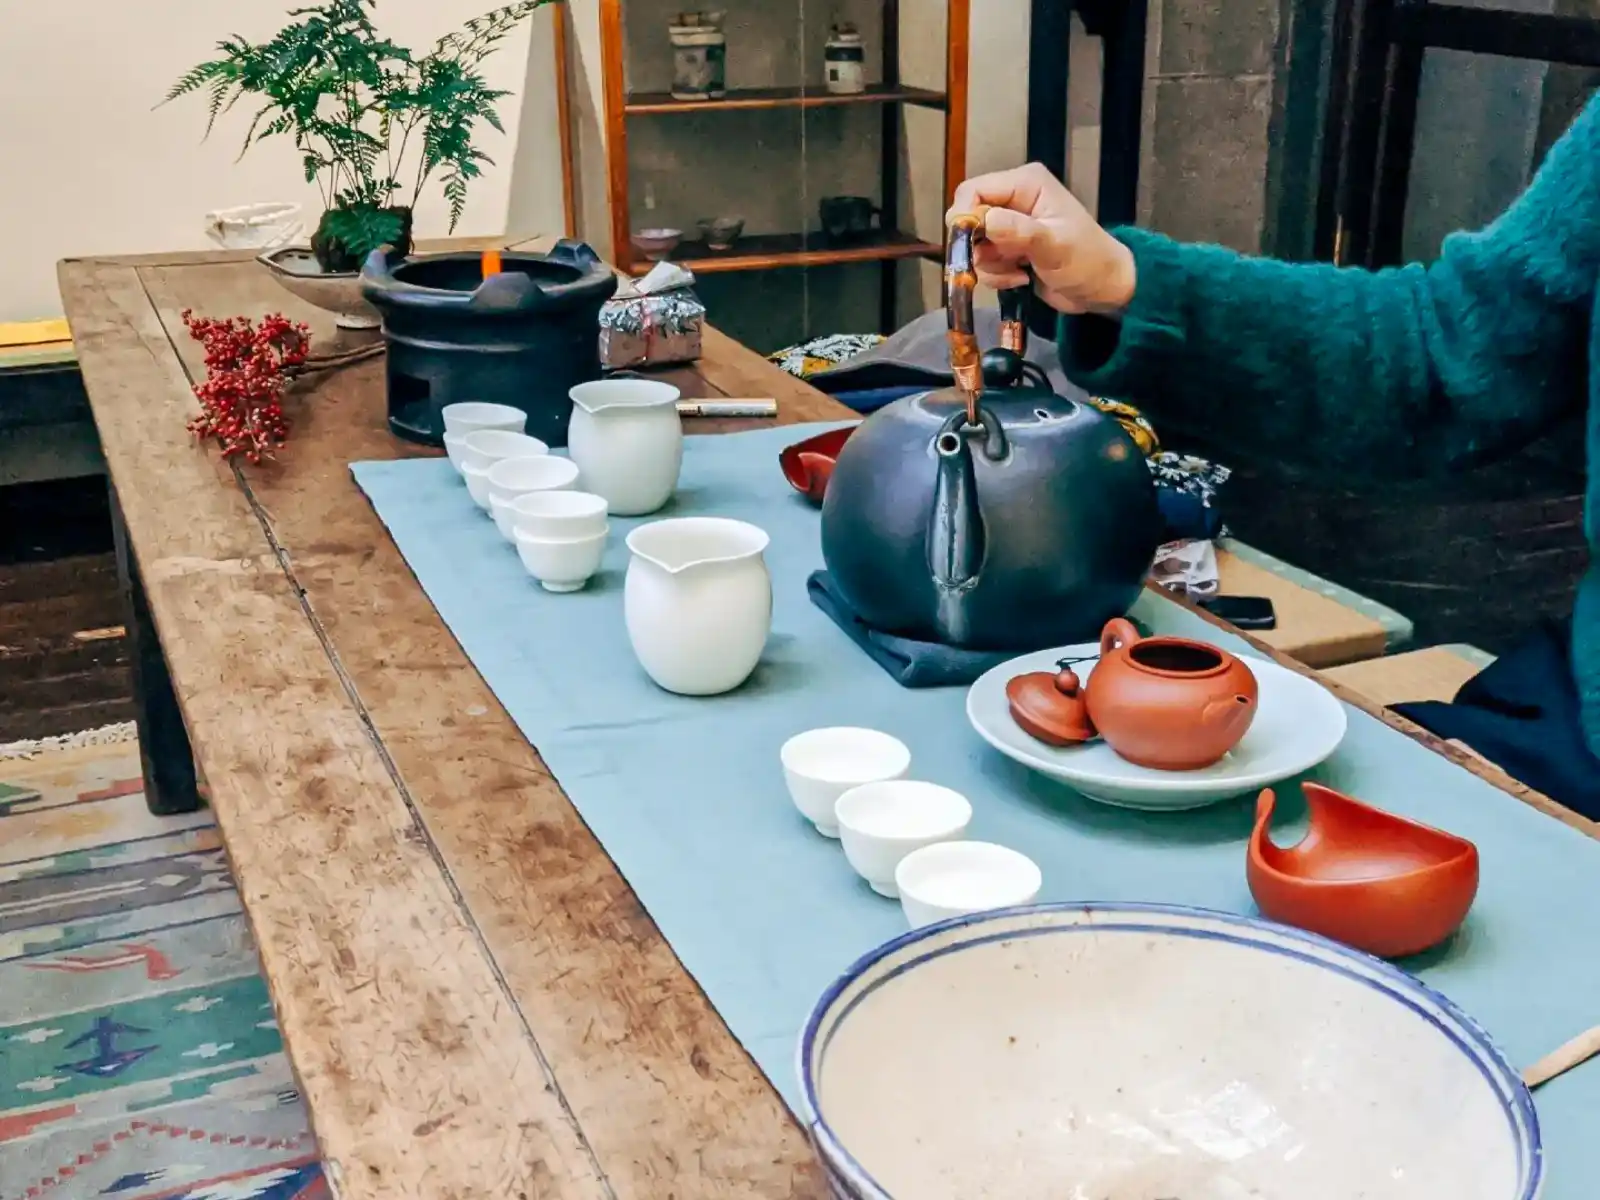 A full tea set on display on a wooden bench.